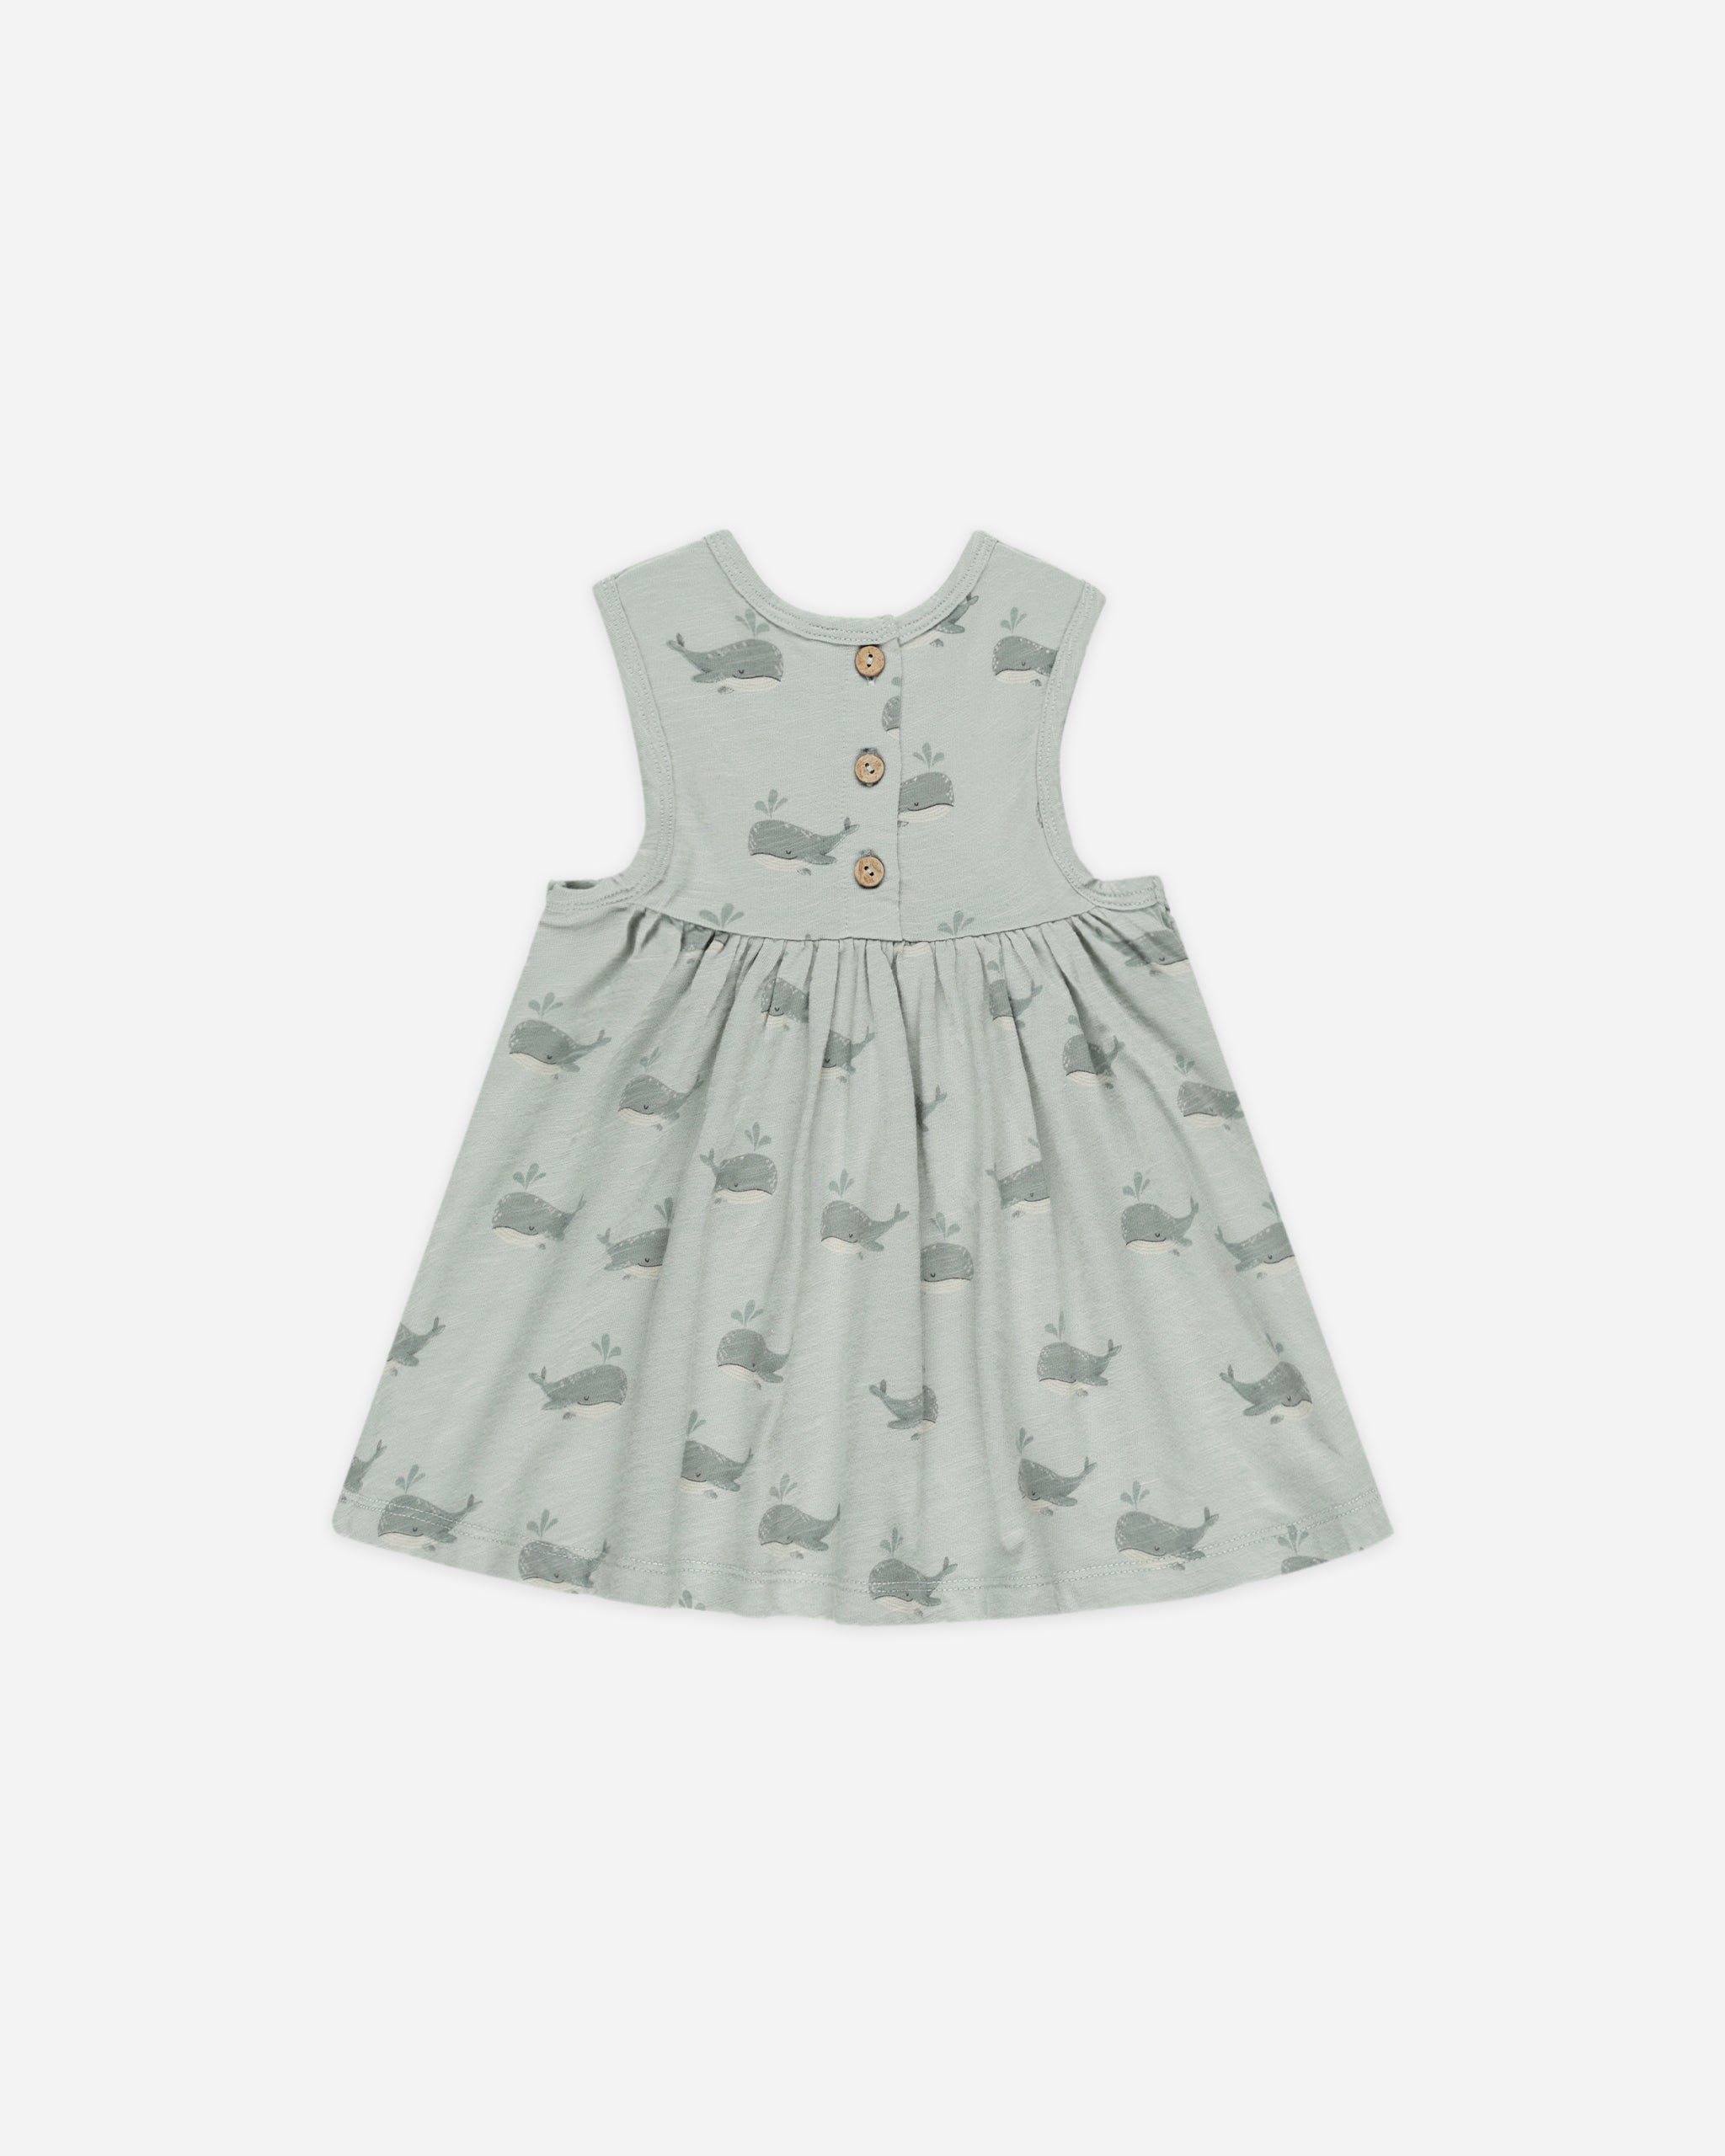 Layla Dress || Whales - Rylee + Cru | Kids Clothes | Trendy Baby Clothes | Modern Infant Outfits |